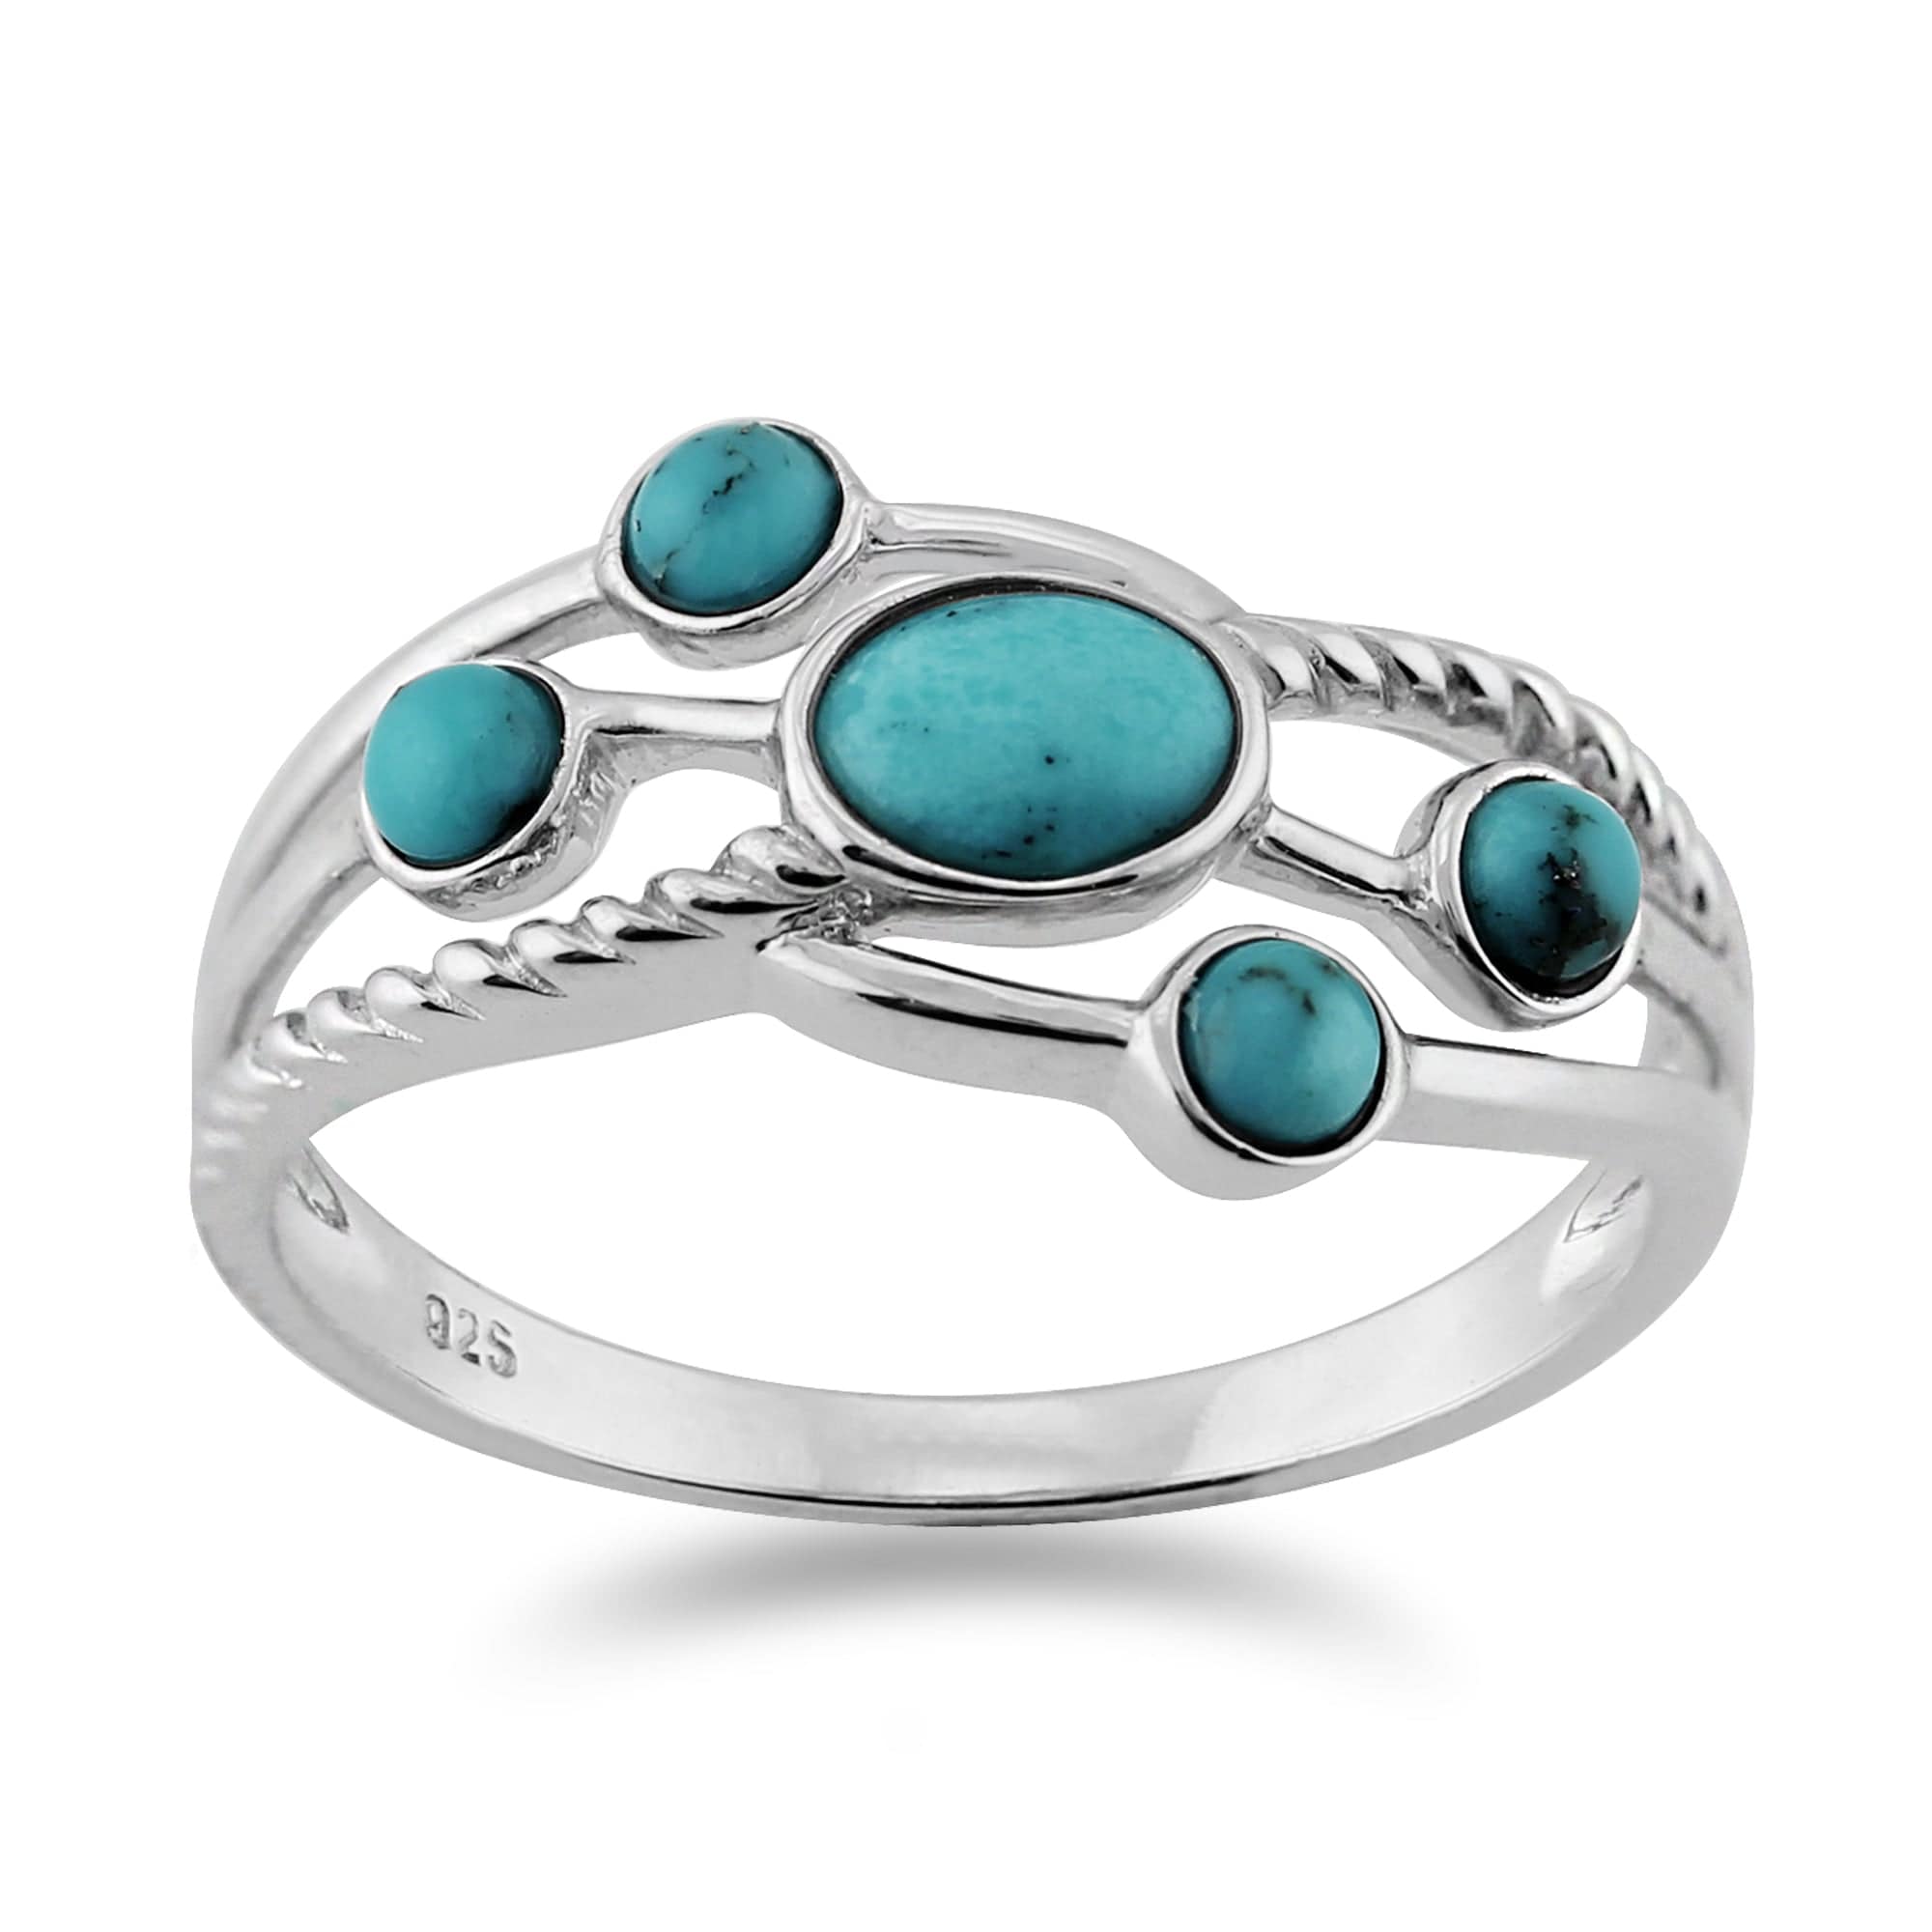 Contemporary Oval Turquoise Cabochon Five Stone Ring in 925 Sterling Silver - Gemondo